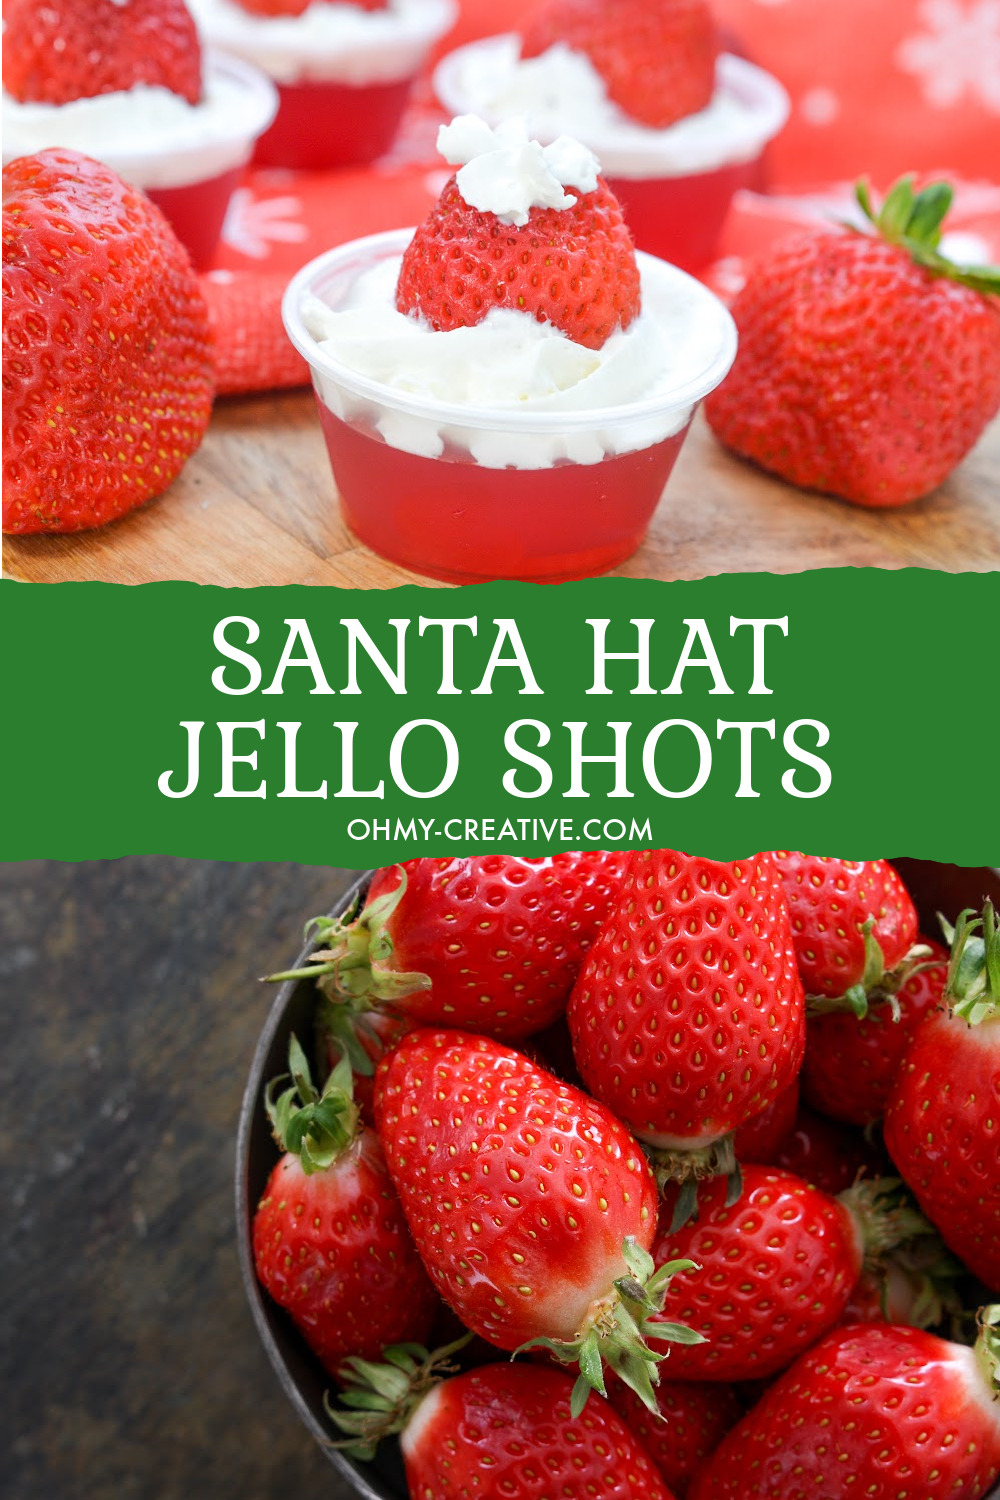 Whip up these Santa Hat Jello Shots using strawberry Jell-O, strawberries and whipped cream - a tasty strawberry jello shot recipe. Also showing a bowl of whole strawberries.